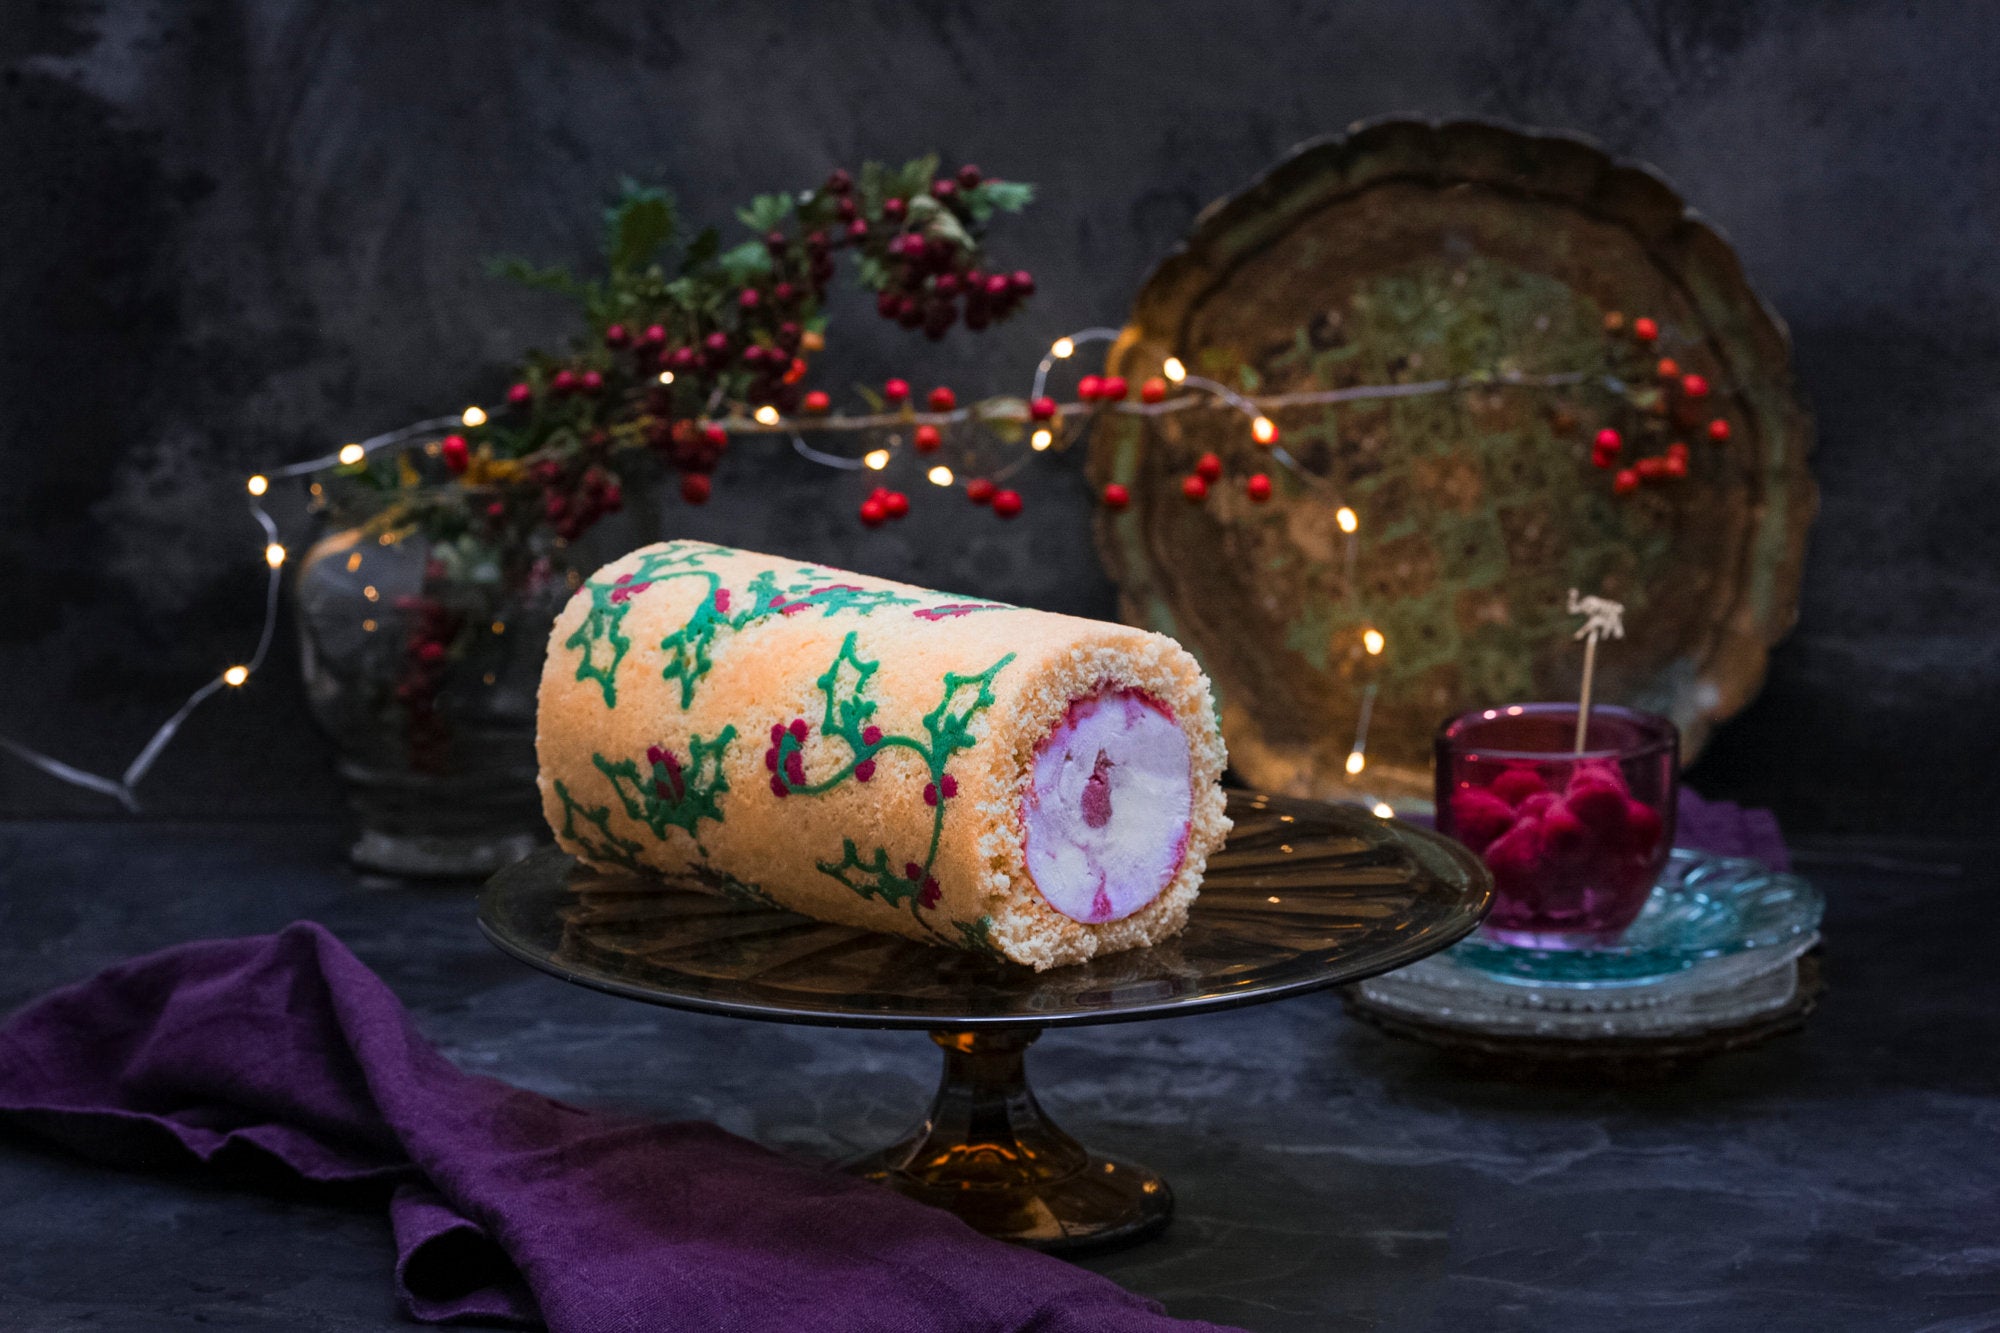 KITCHEN DIARIES: Decorating an Antarctic Holly Roll - Ruby Violet Ice Cream & Sorbet